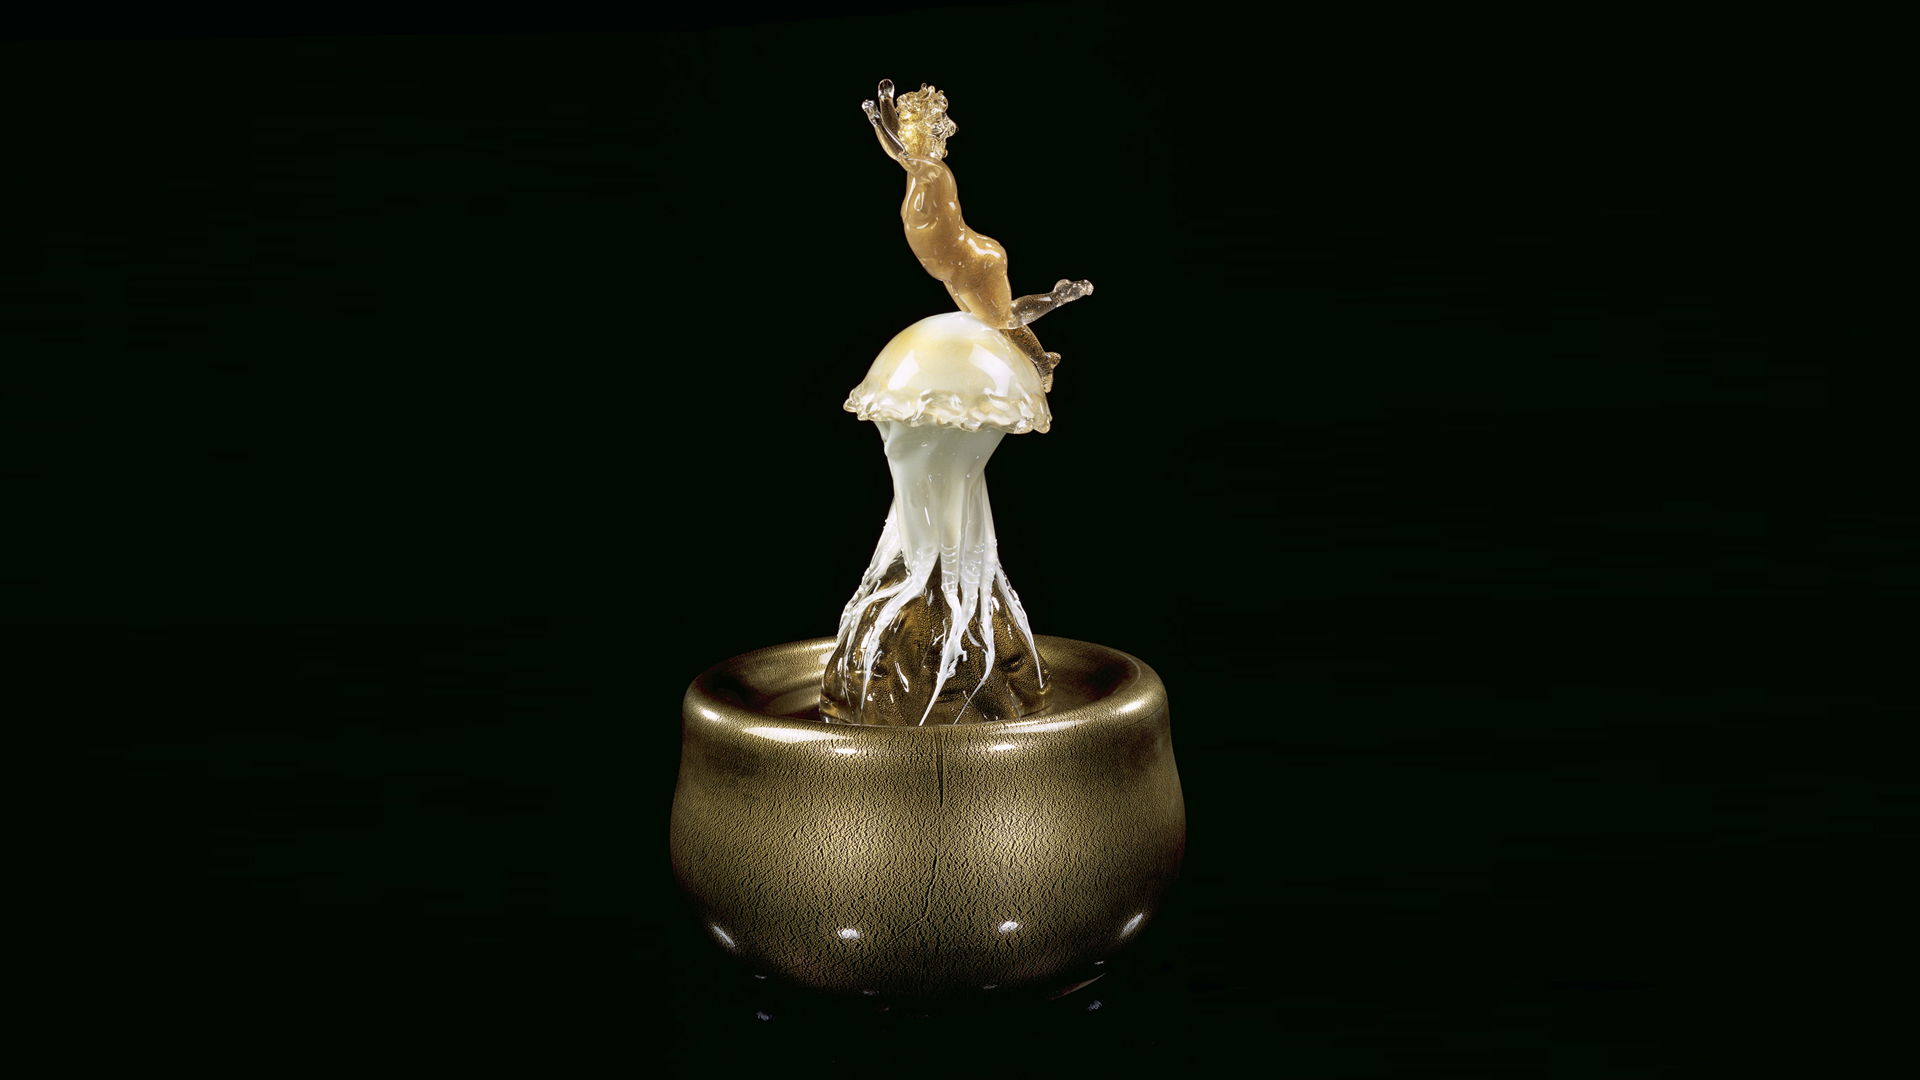 Dale Chihuly - Putto with Jellyfish atop Golden Vessel